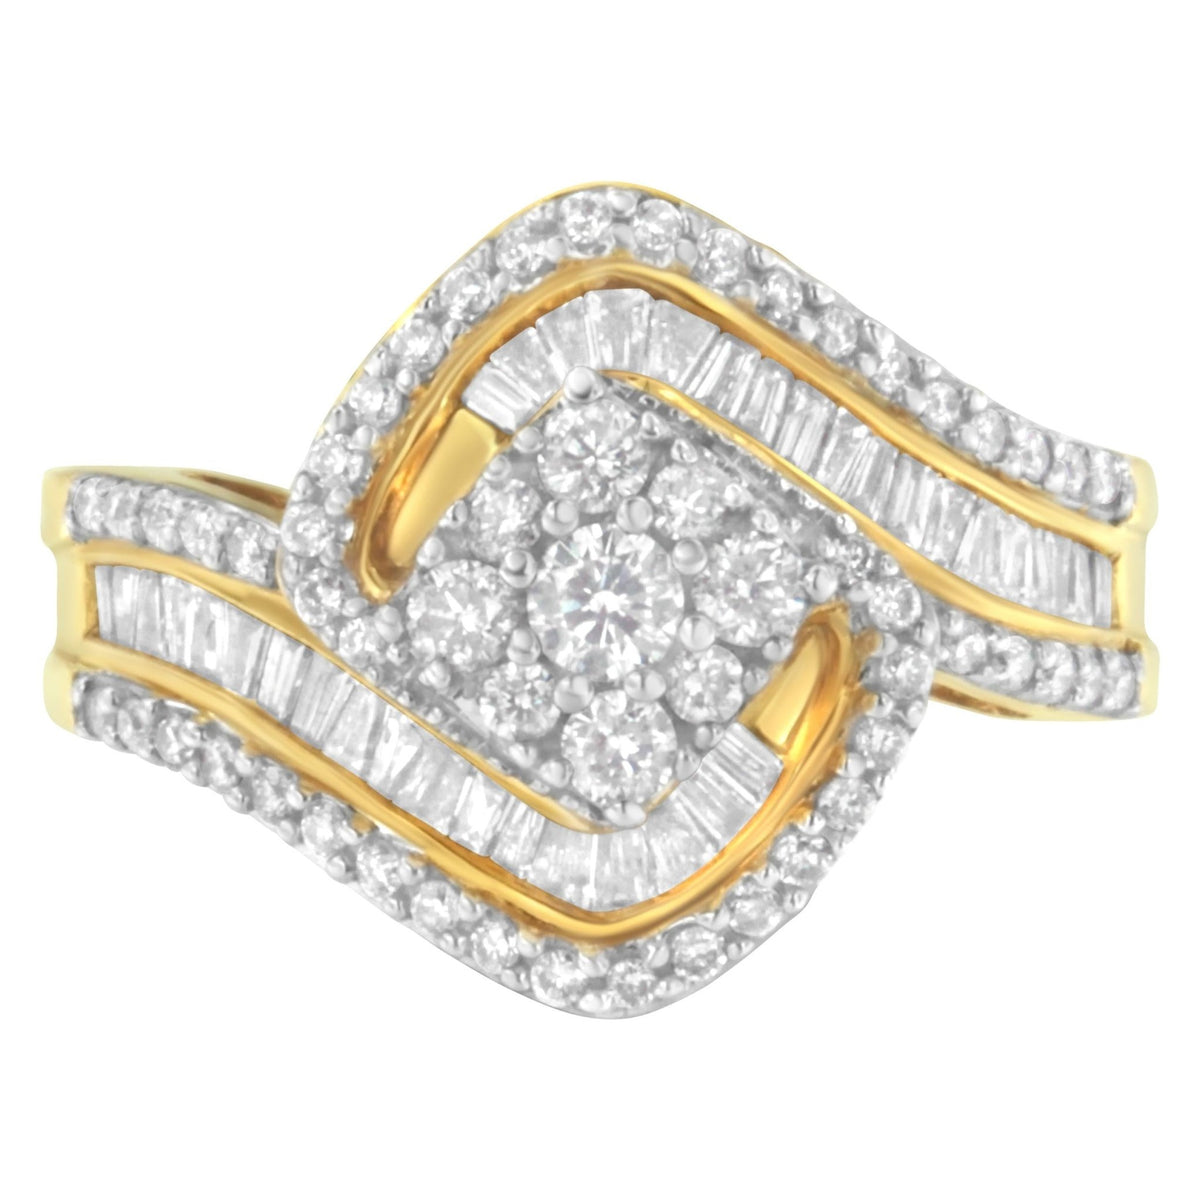 14K Yellow Gold 1.0 Cttw Baguette &amp; Brilliant-Cut Diamond Round Floral Cluster Engagement or Fashion Ring with Swirl Wrapped Triple Row Band (H-I Color, SI2-I1 Clarity) - Size 6-3/4 - LinkagejewelrydesignLinkagejewelrydesign